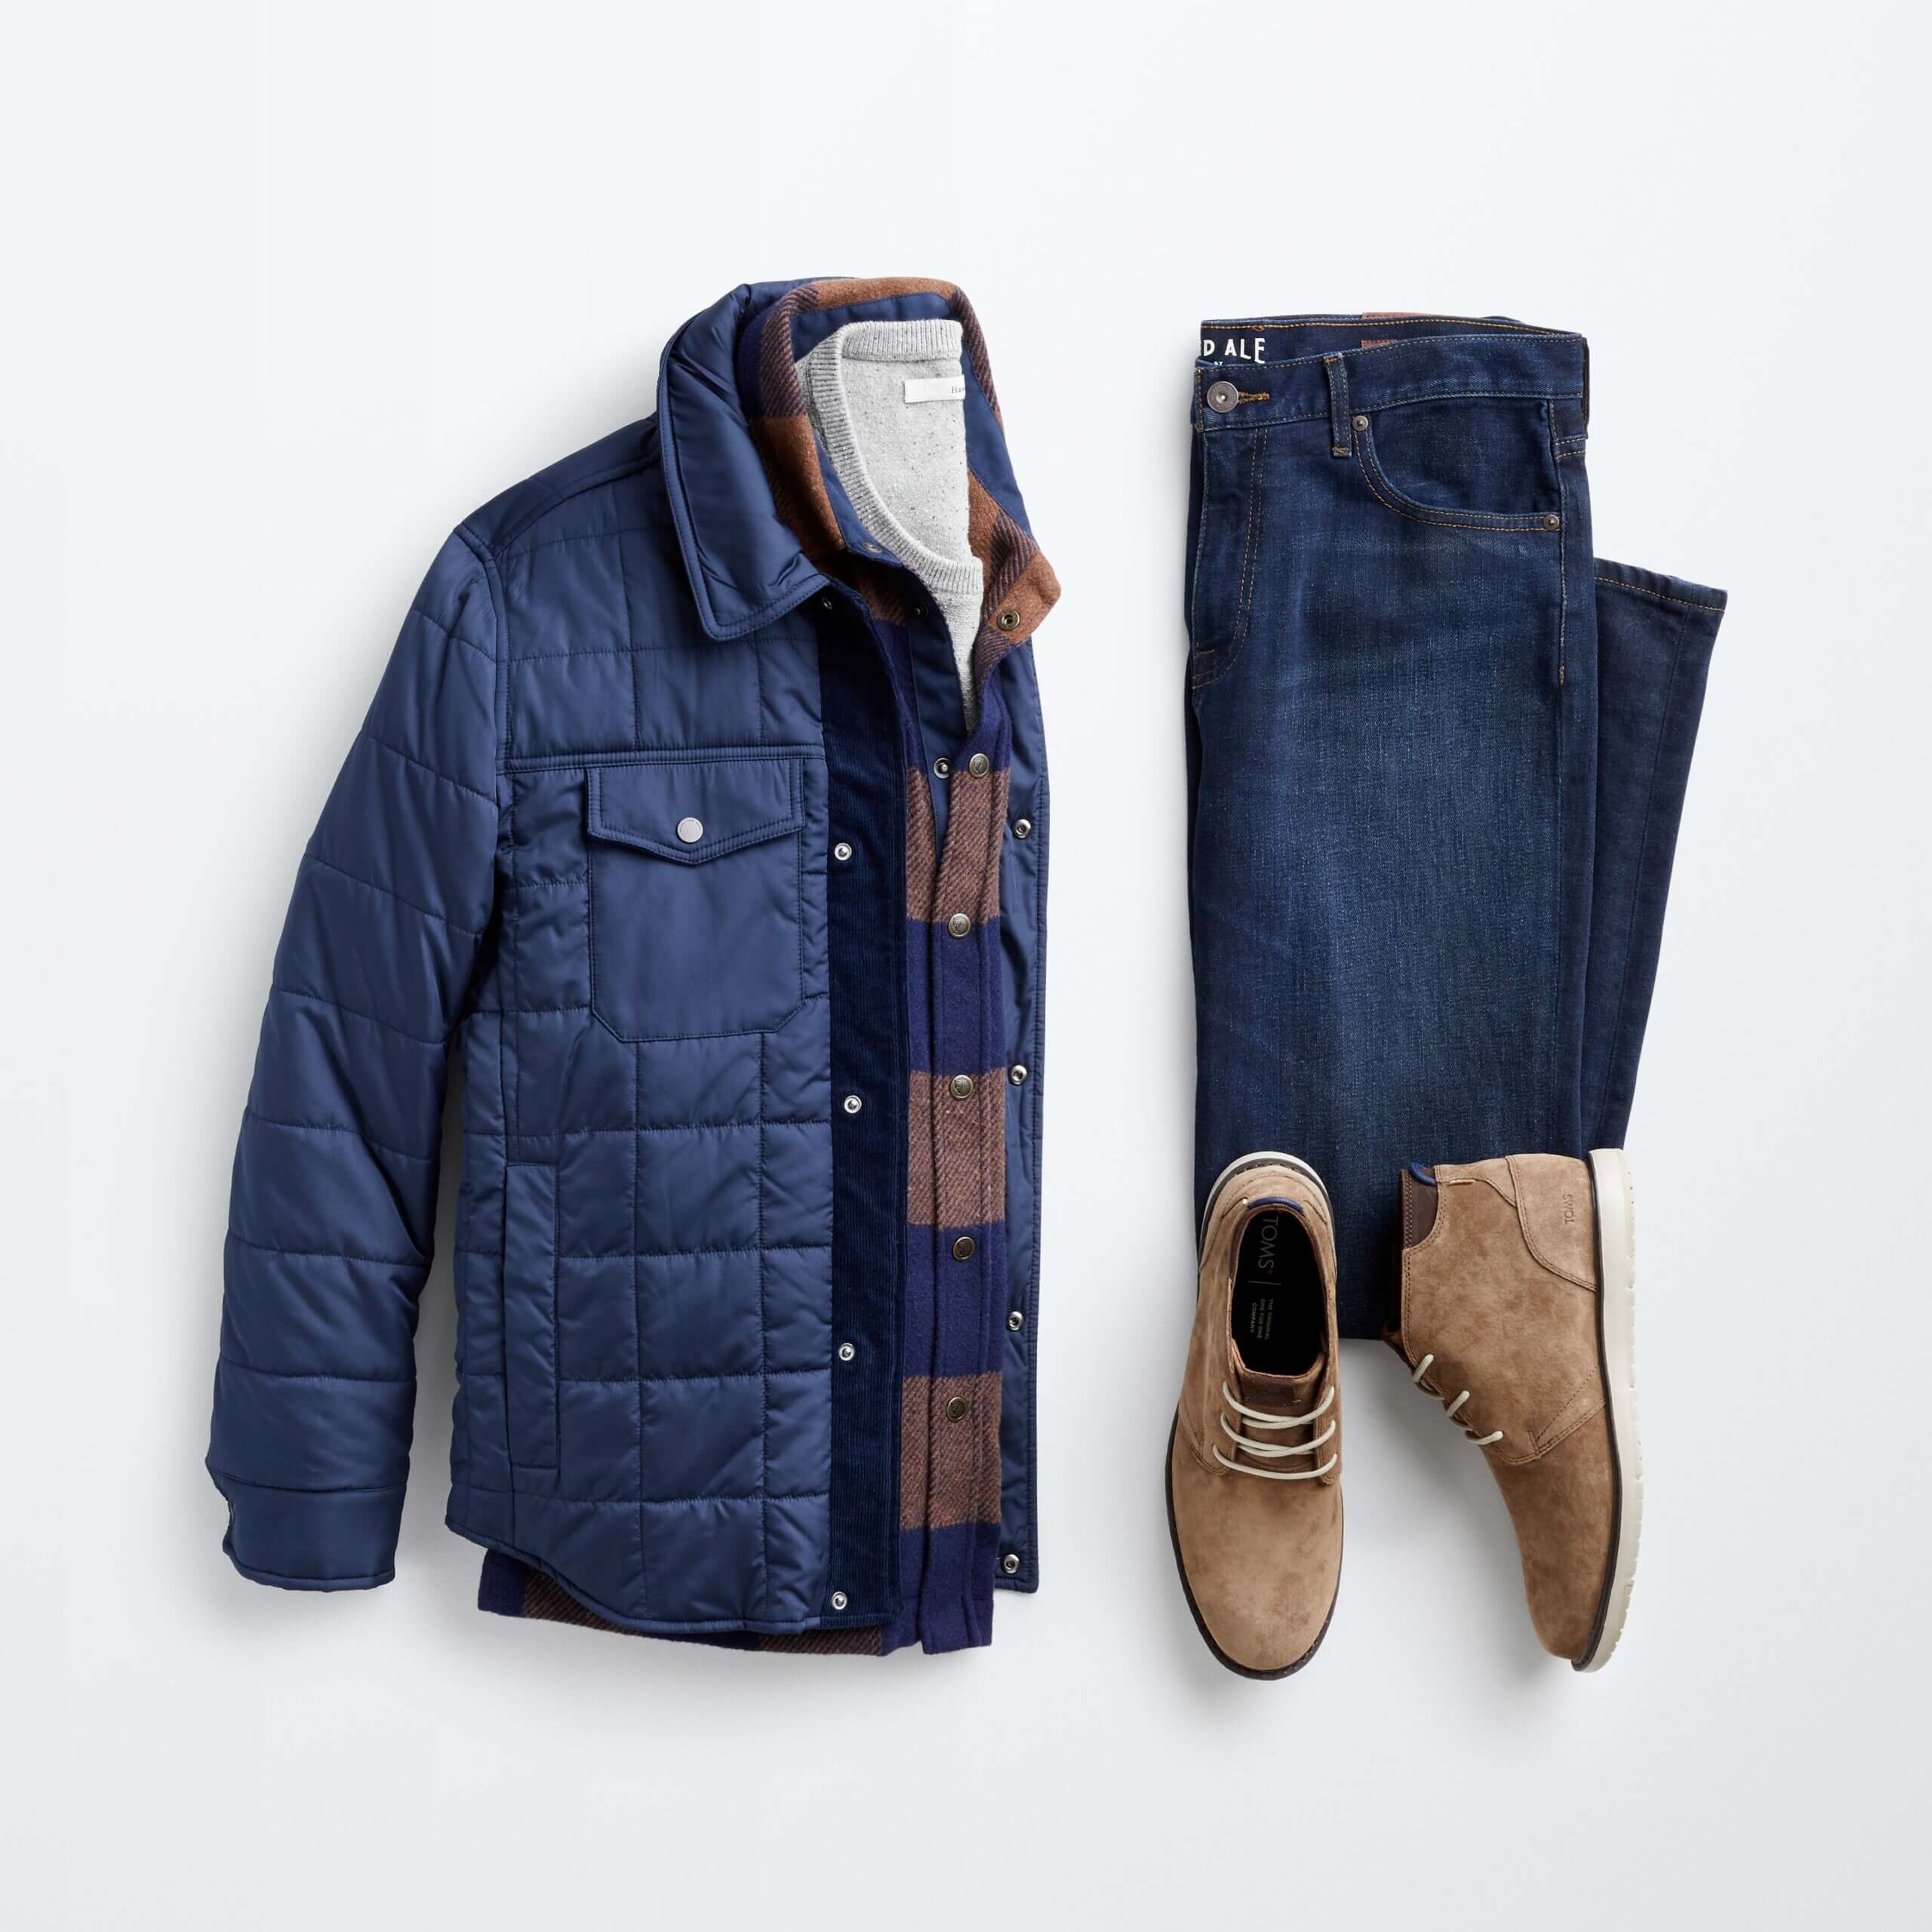 What to Wear for Christmas | Our Men's Style Guide | Stitch Fix